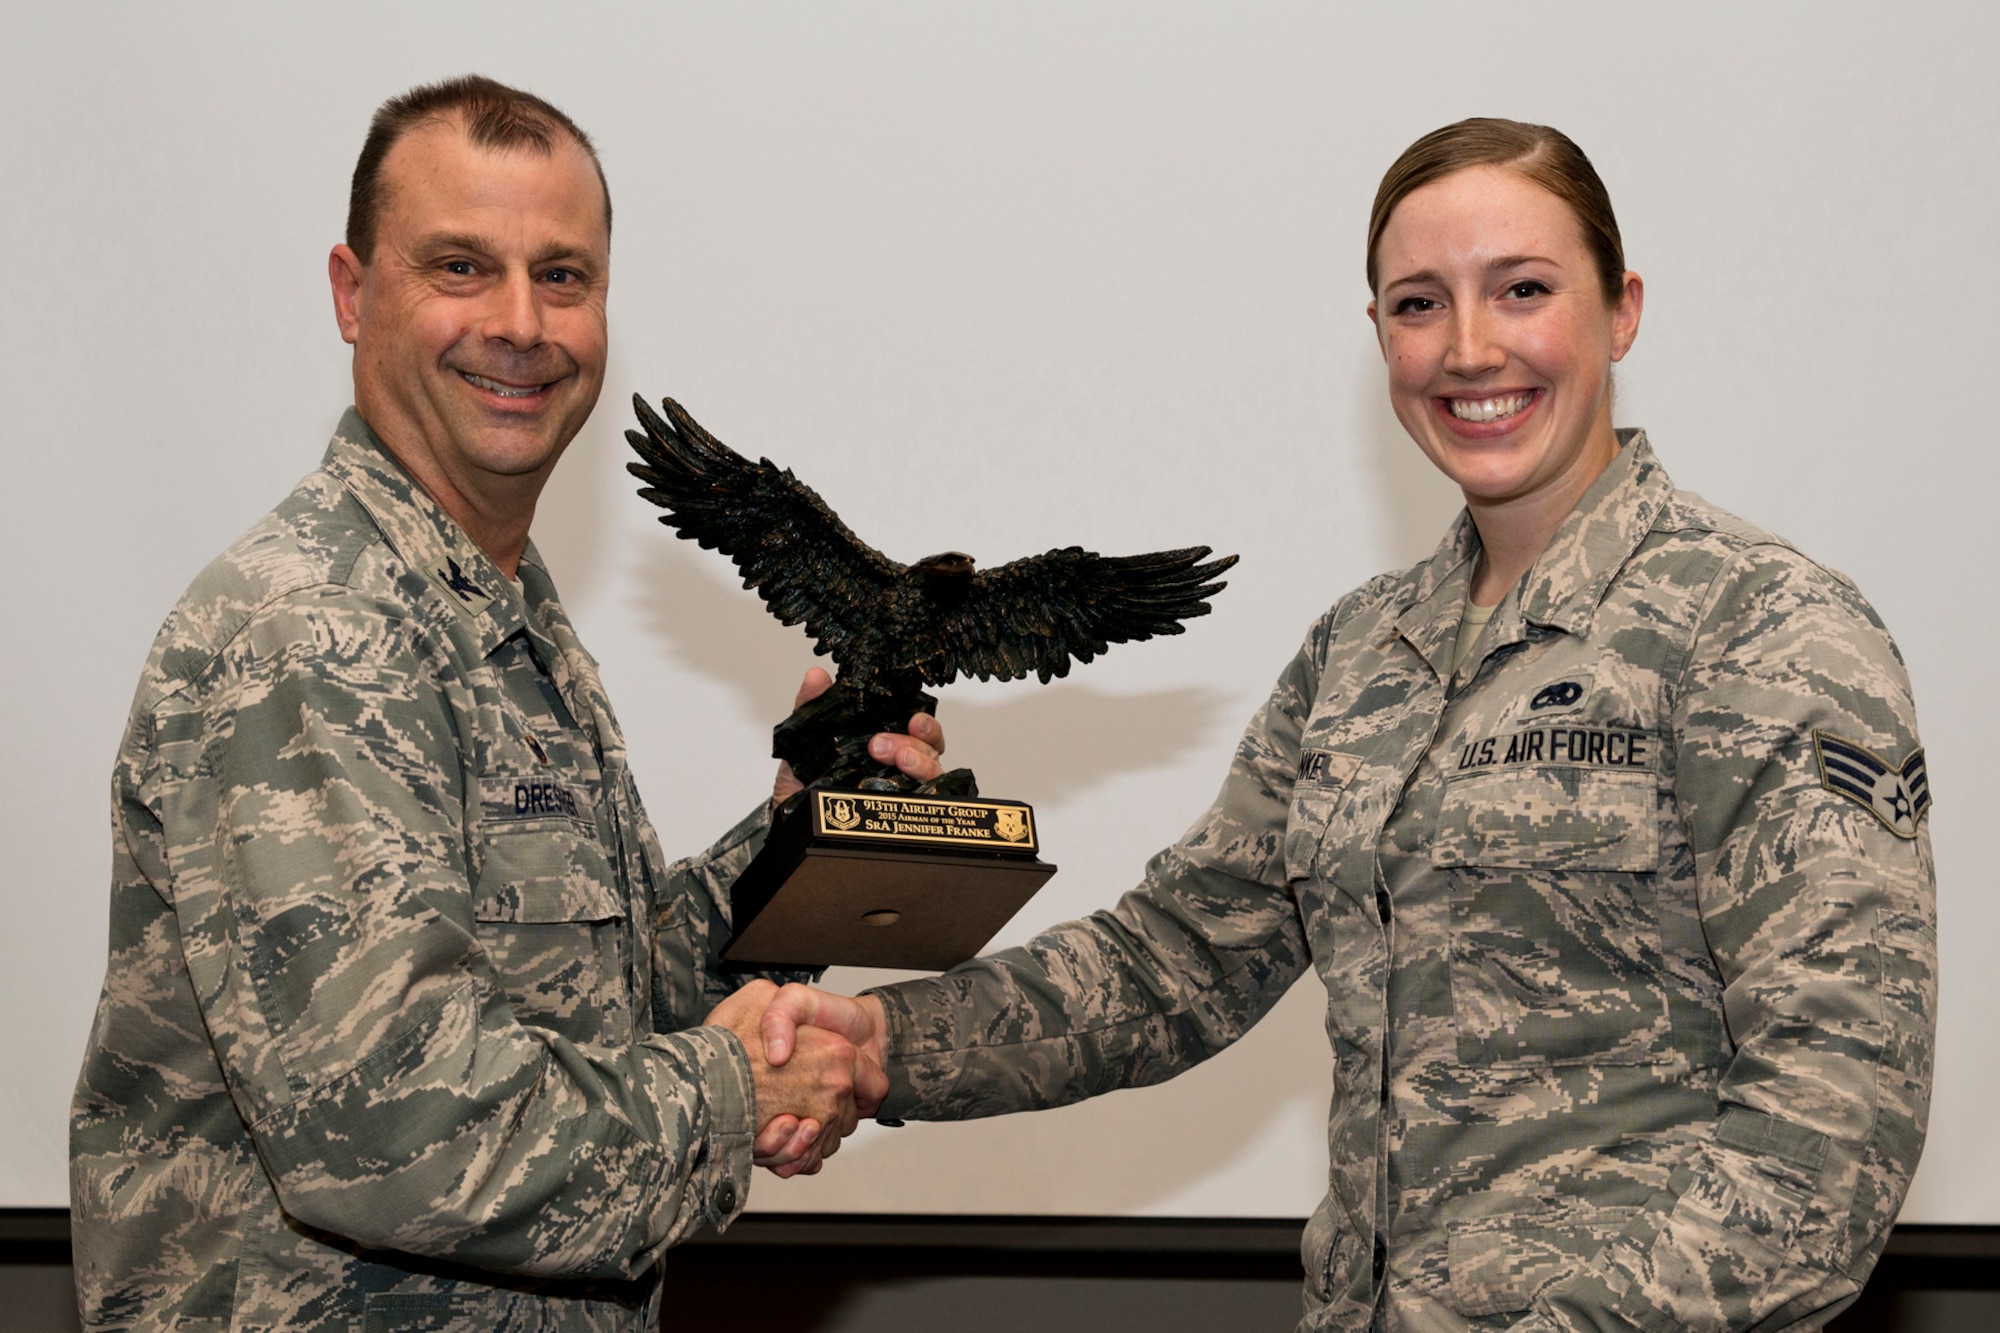 U.S. Air Force Reserve Col. Craig Drescher, commander, 913th Airlift Group, and Senior Airman Jennifer Franke, a crew chief assigned to the 913th Maintenance Squadron, pose for a photo during a commander’s call at Little Rock Air Force Base, Ark., Mar. 13, 2016. Franke was presented the 2015 Airman of the Year award for the 913 AG. (U.S. Air Force photo by Master Sgt. Jeff Walston/Released)